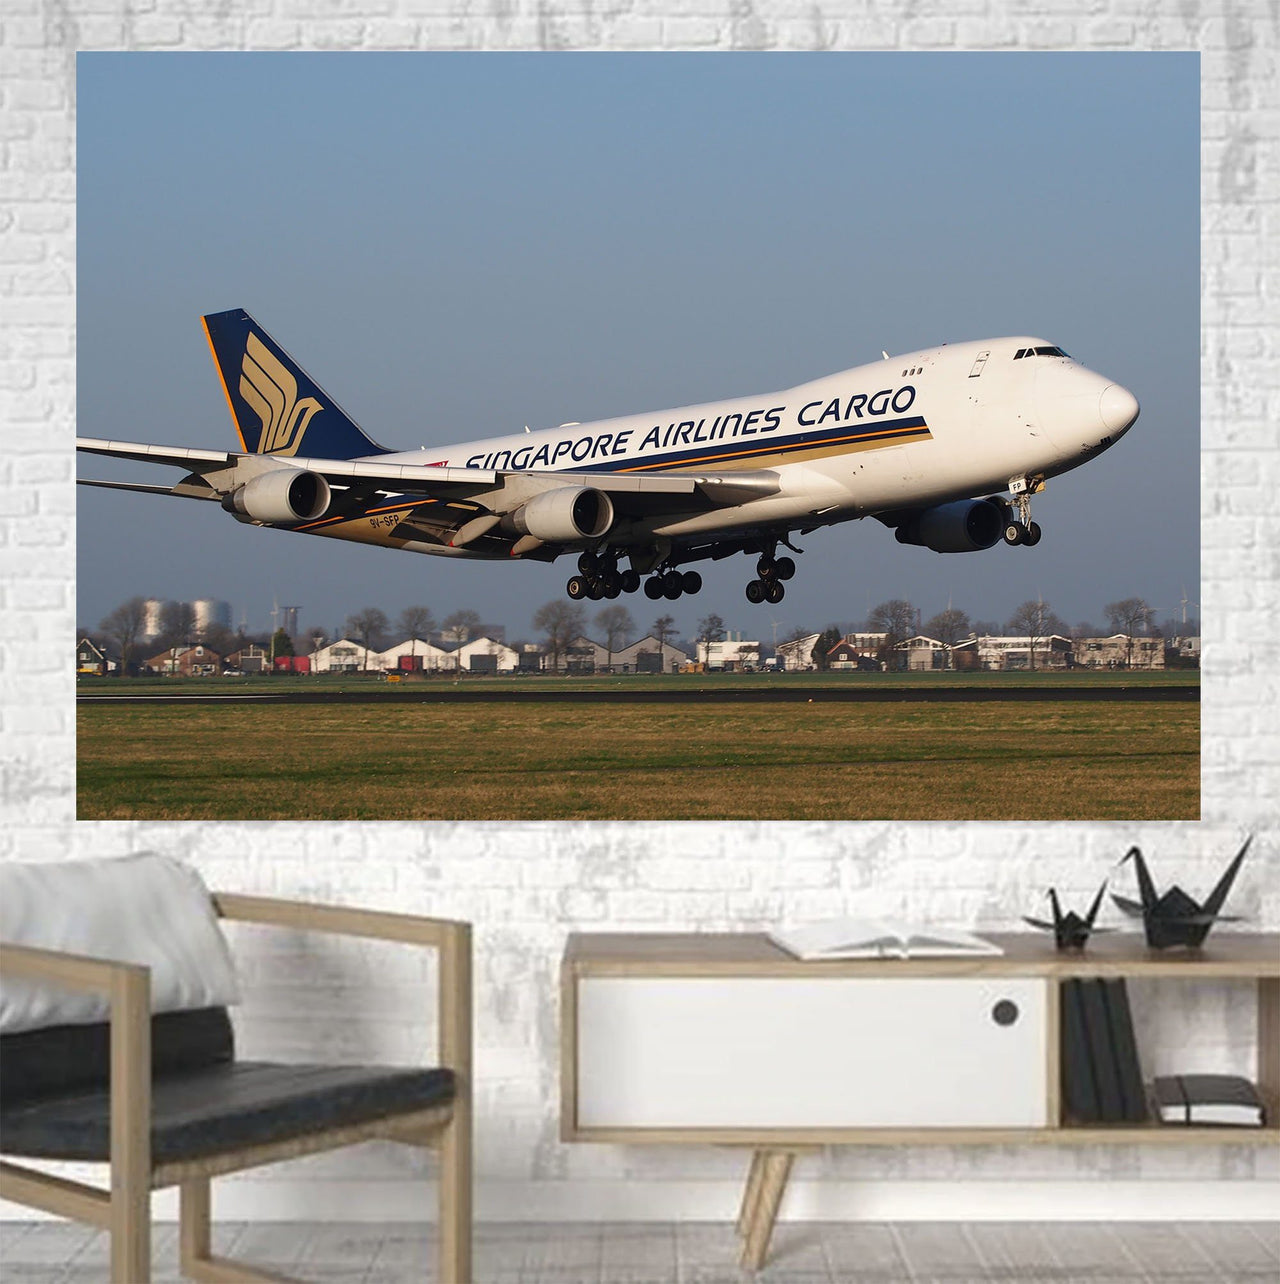 Singapore Airlines Cargo Boeing 747 Printed Canvas Posters (1 Piece) Aviation Shop 